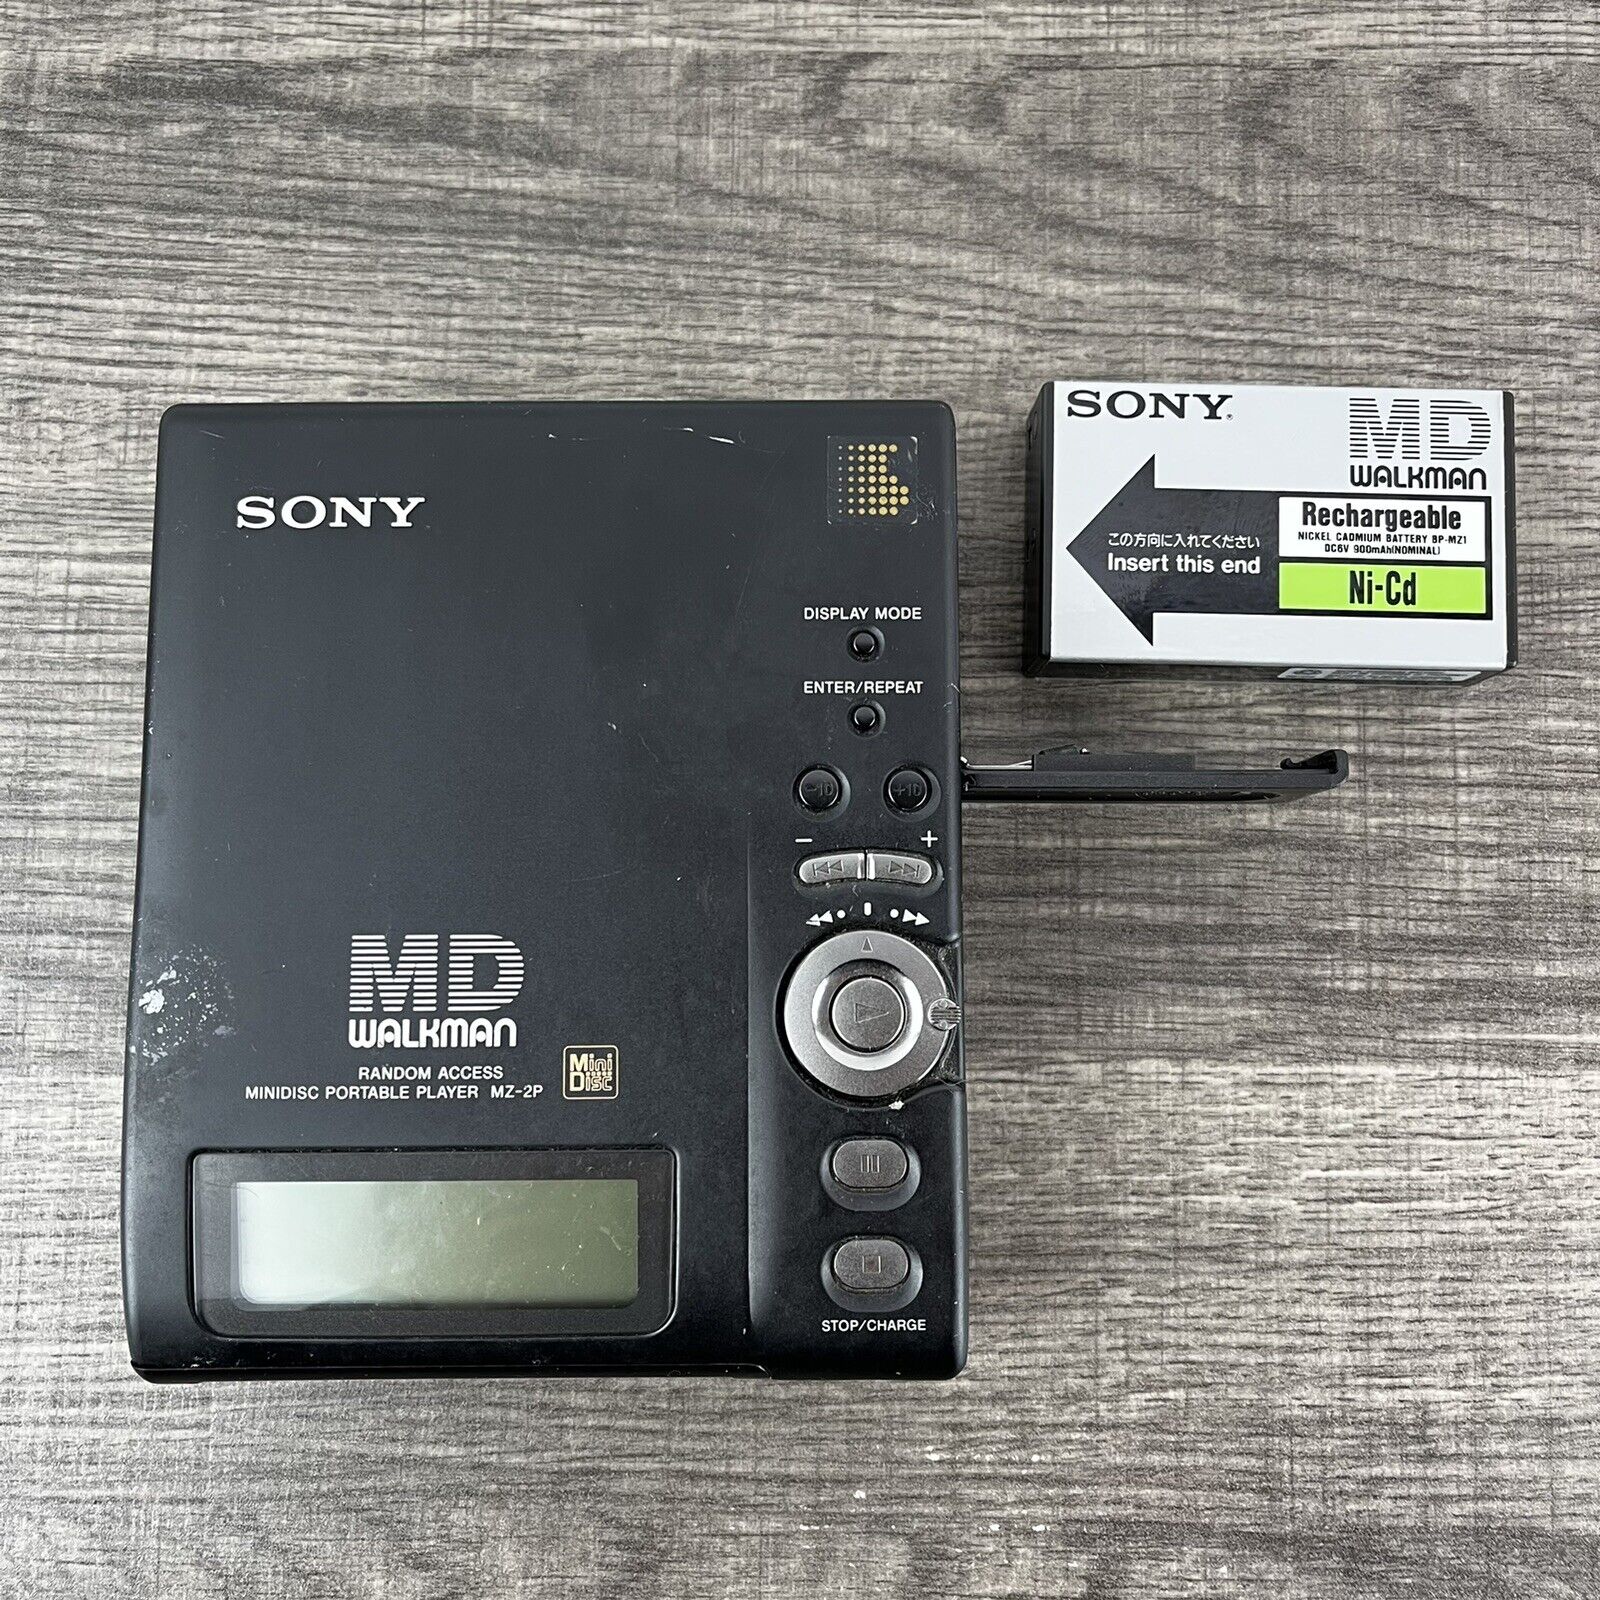 Vintage Sony Md Walkman Mz-2p Minidisc Portable Player Untested - No Charger